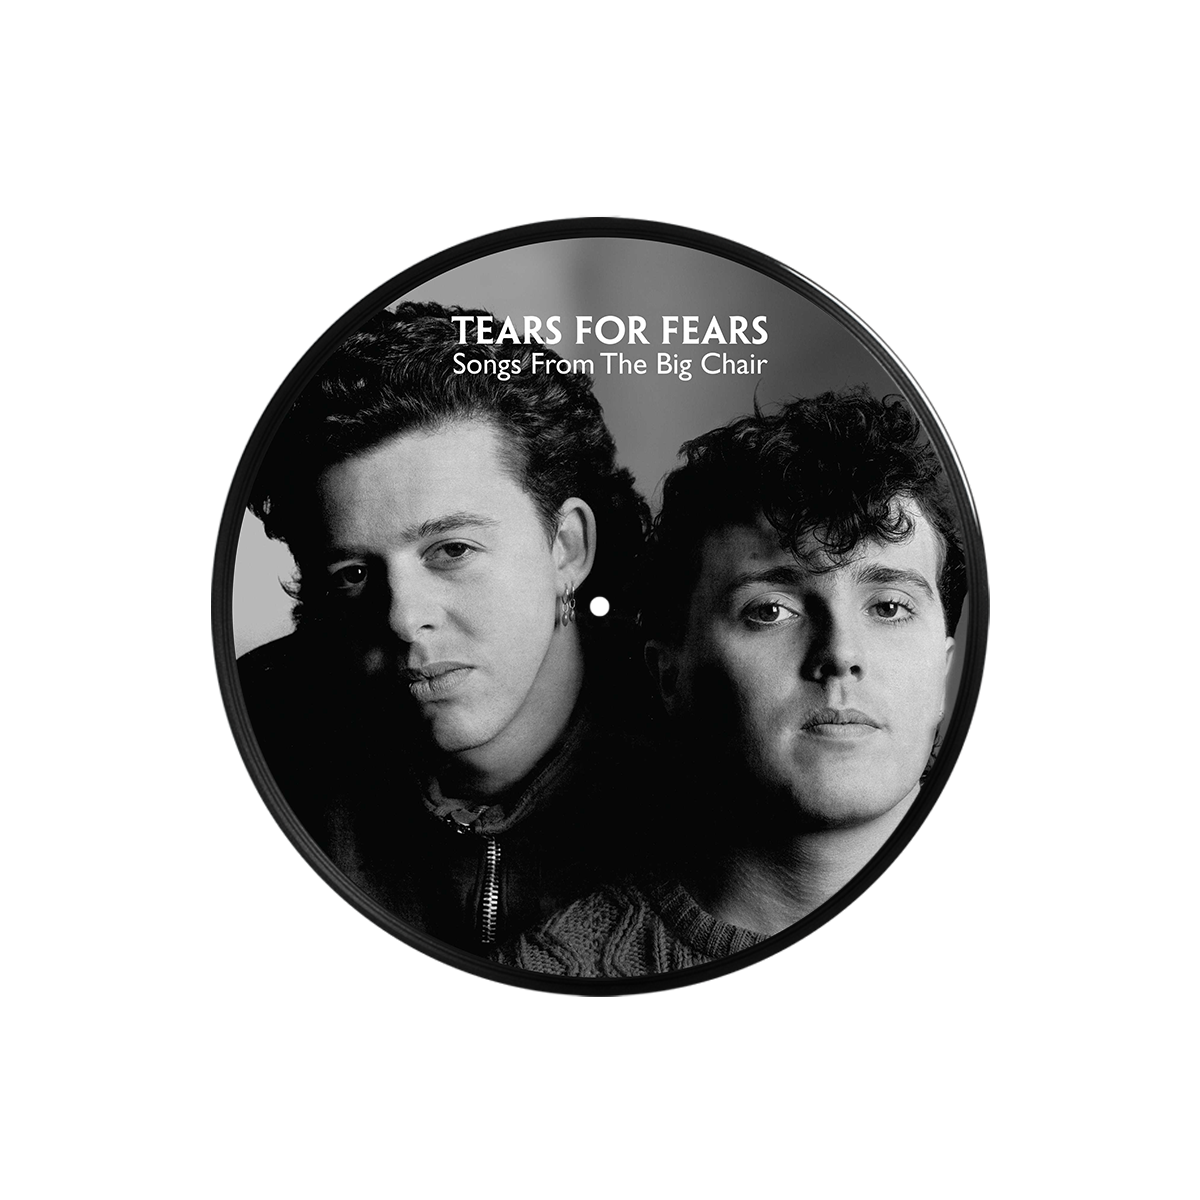 Songs From The Big Chair Picture Disc, tears for fears 